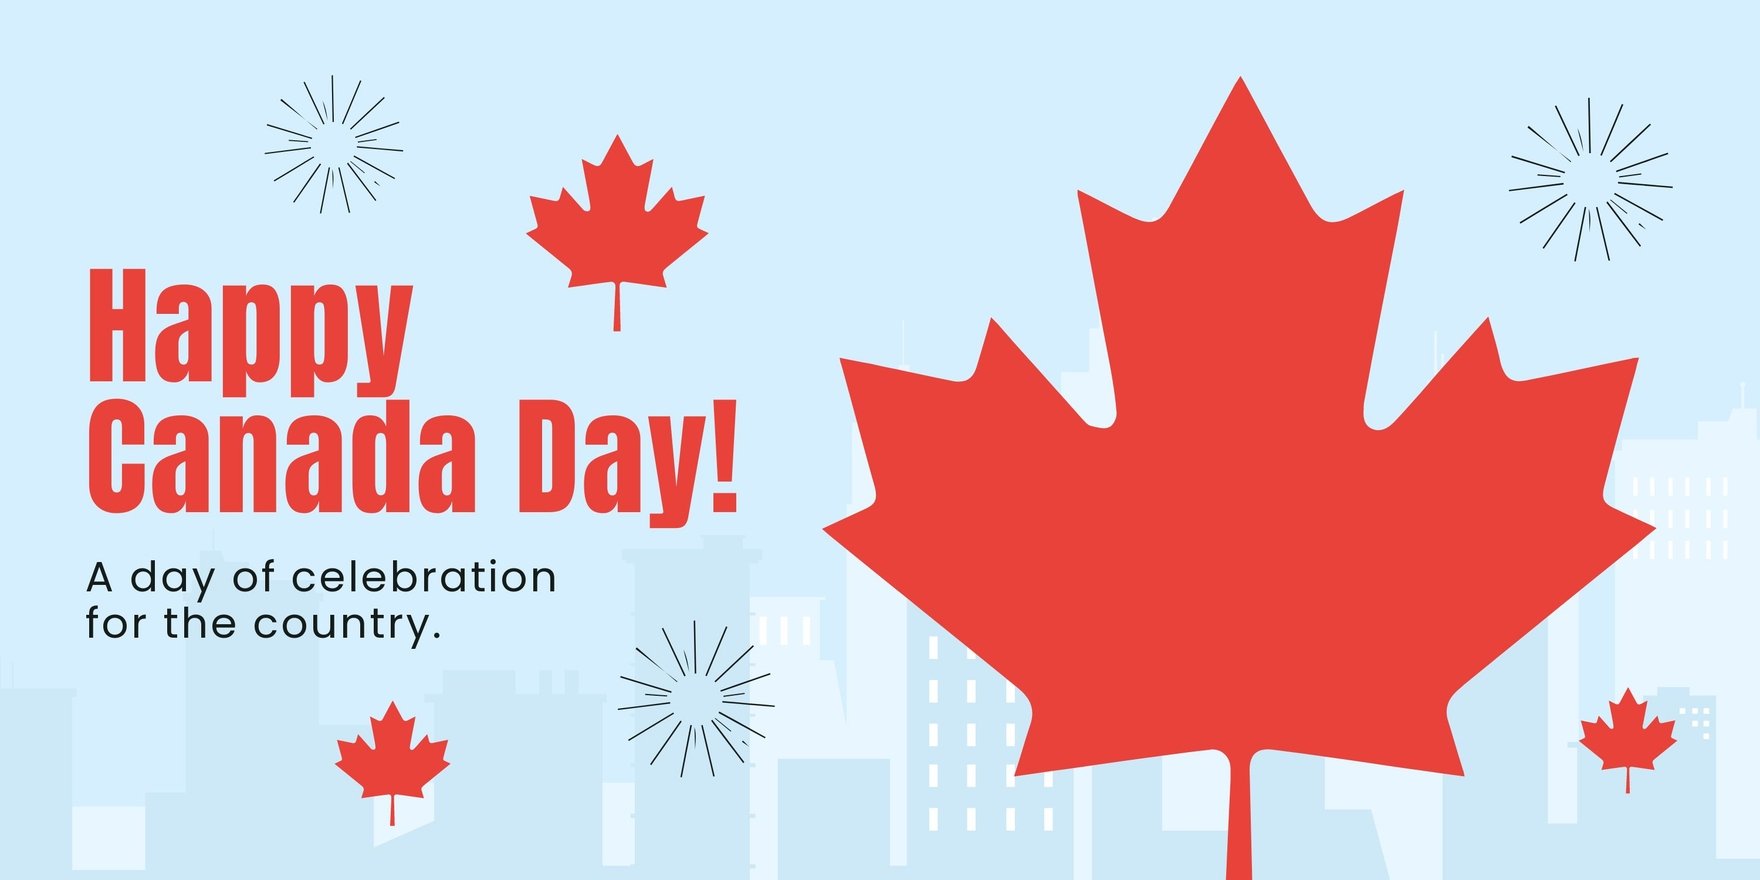 Happy Canada Day Banner in Word, Google Docs, Illustrator, PSD, Apple Pages, Publisher, JPG